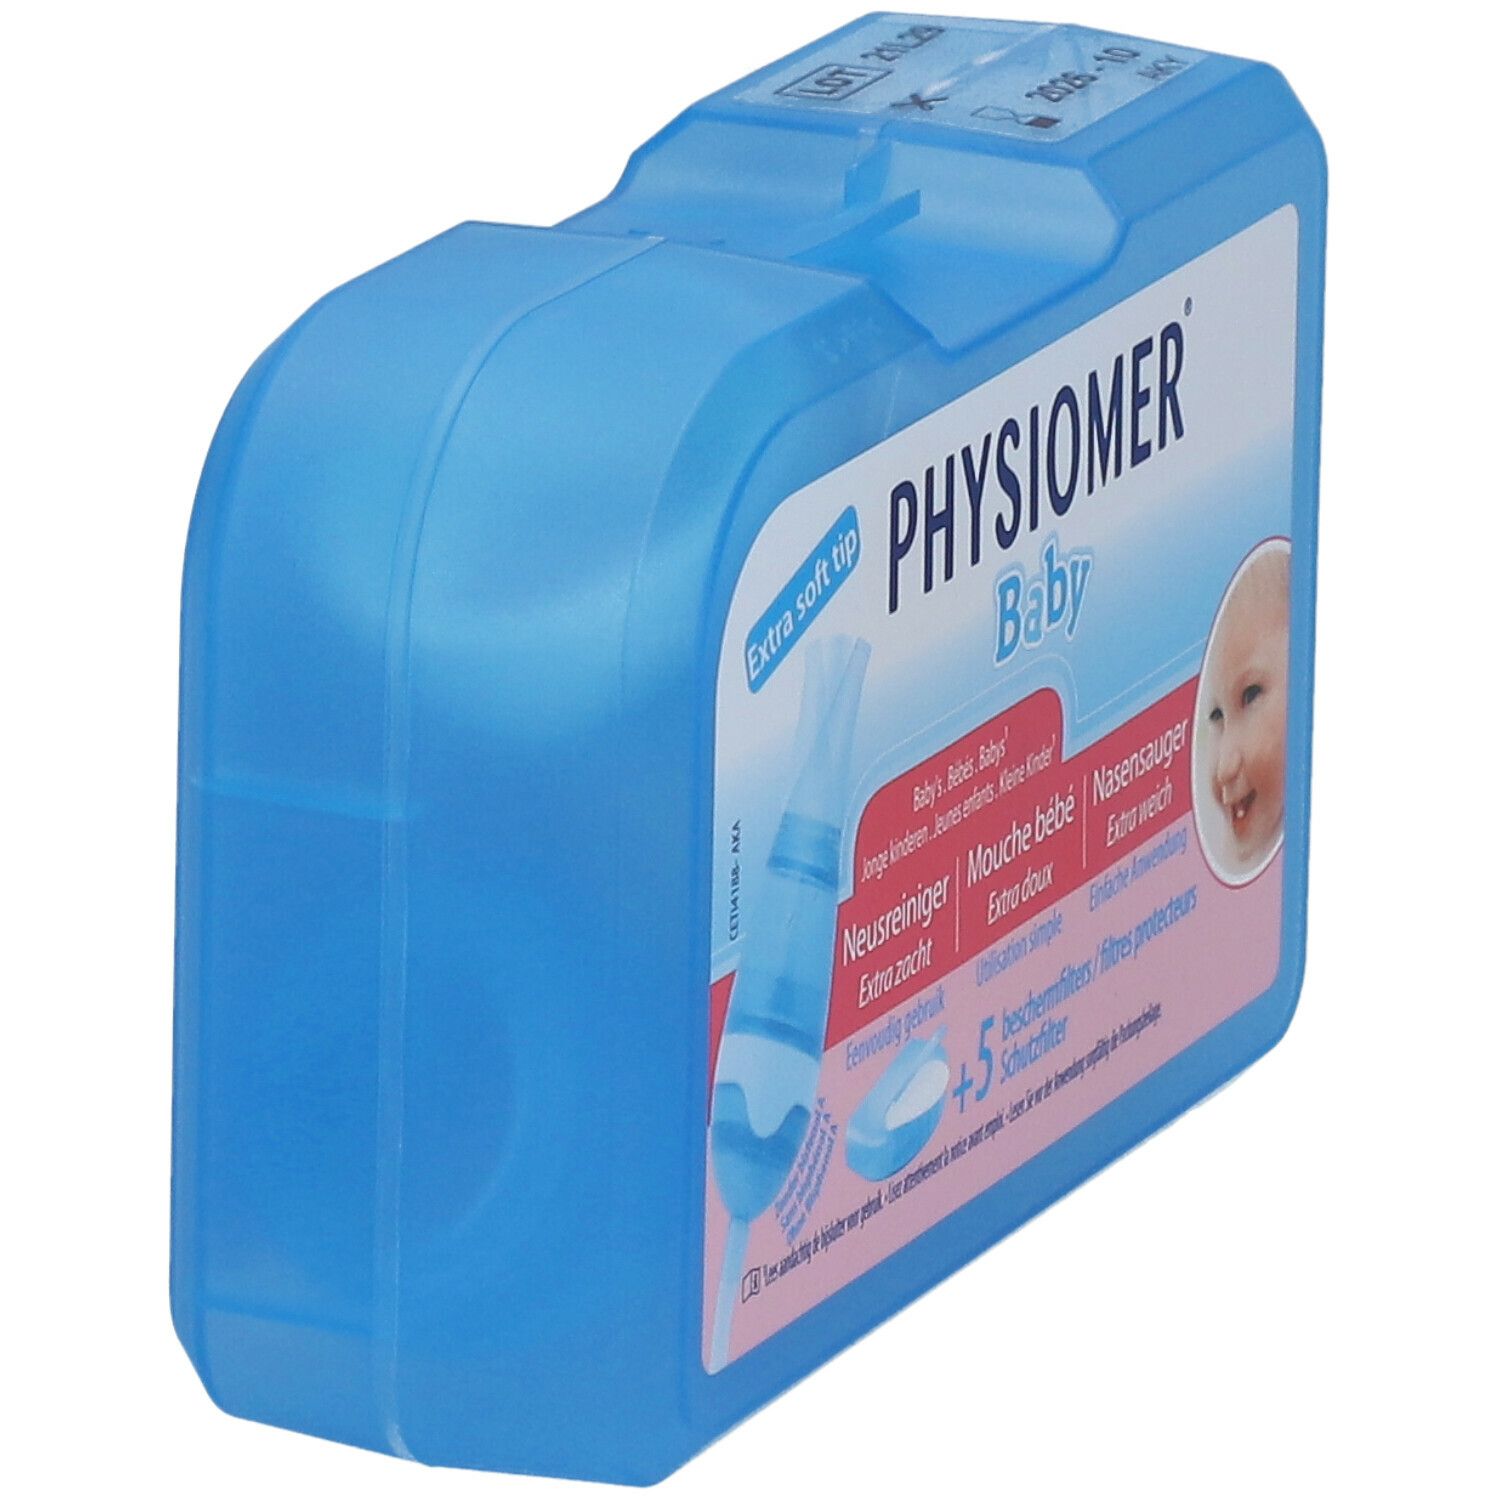 Physiomer Nose Cleaner